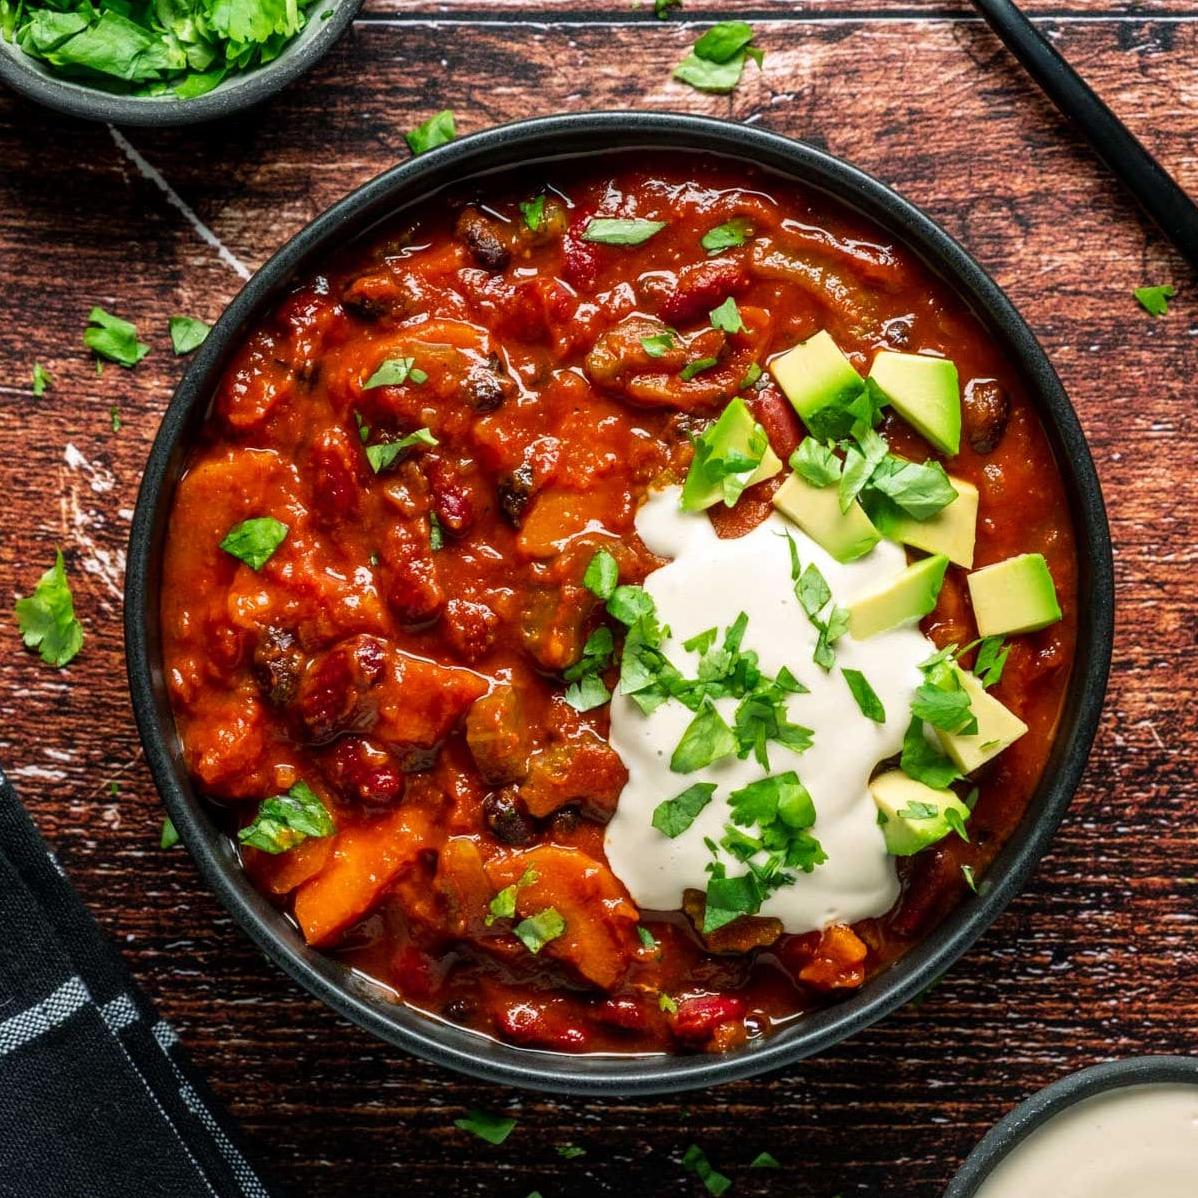  This vegan chili may be meatless, but it's loaded with flavor.